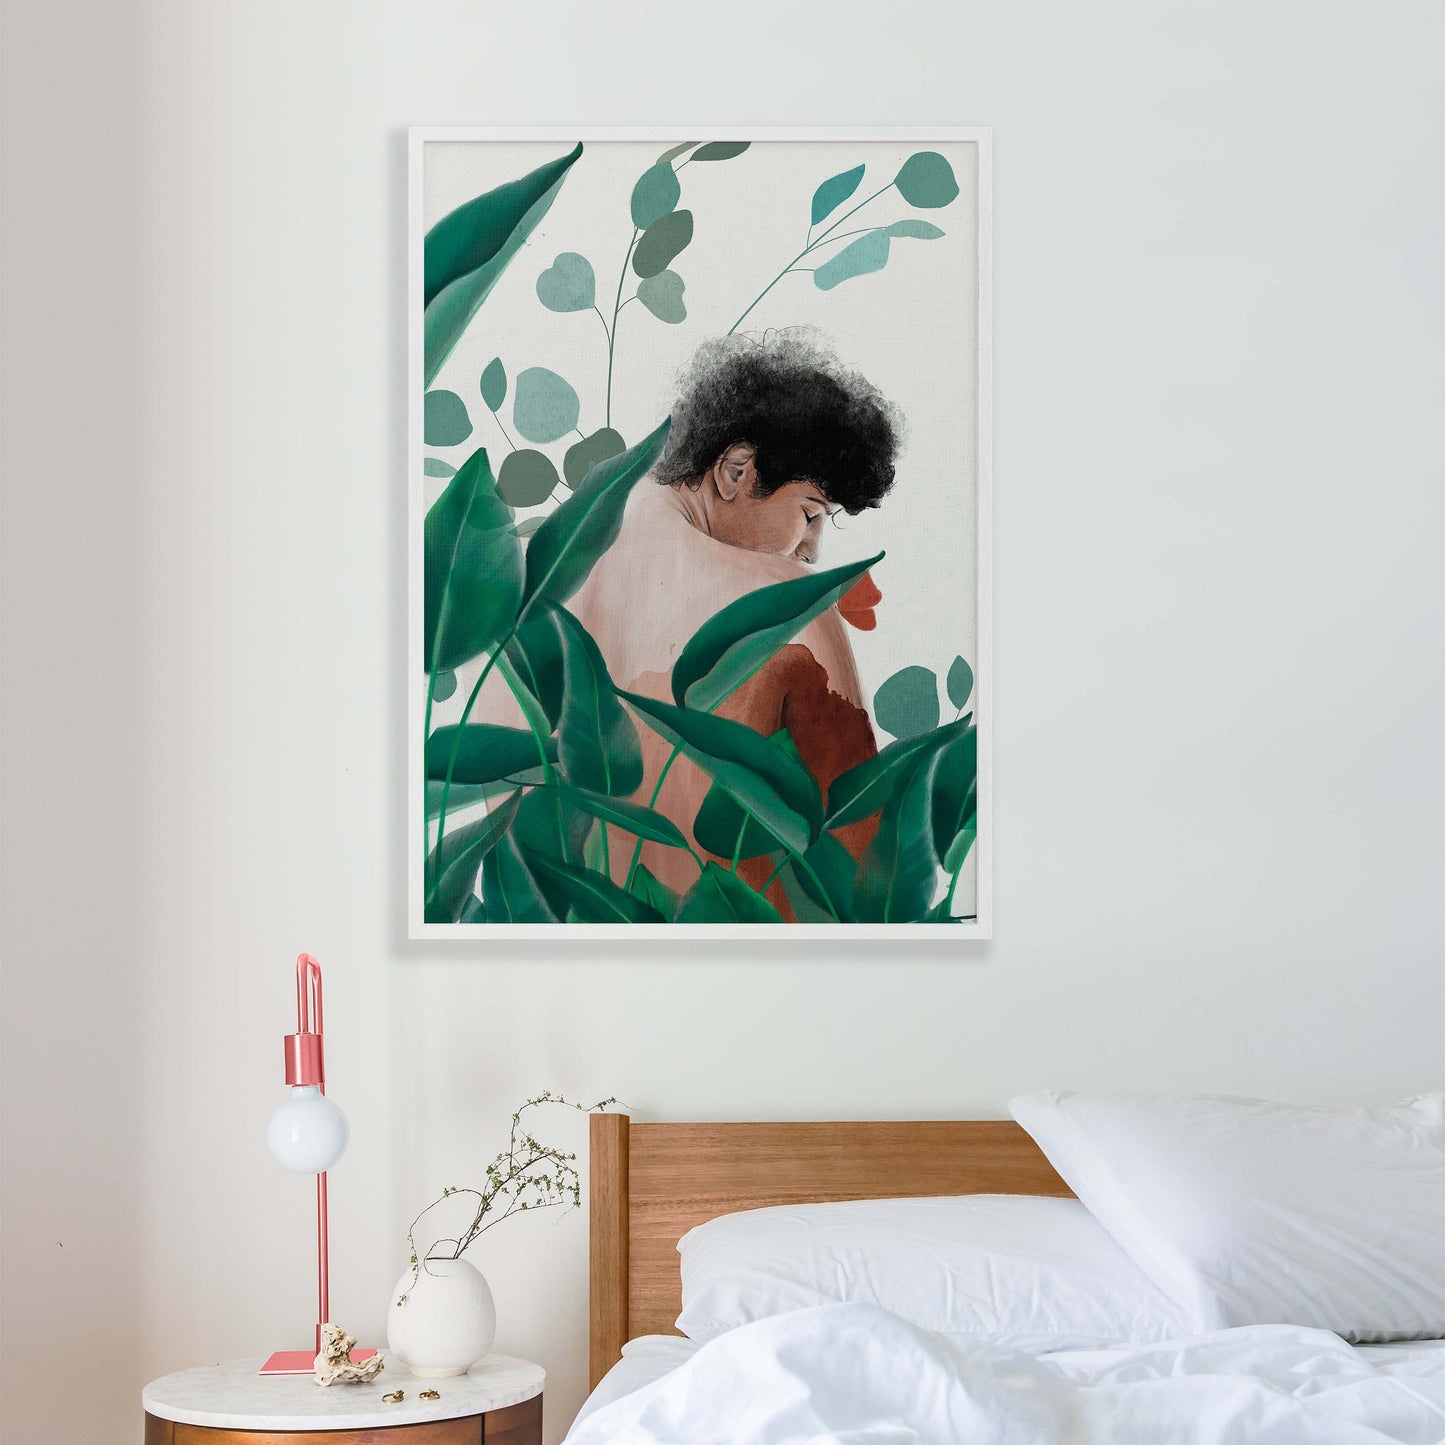 A boy & a butterfly surrounded with plants poster in green, white, peach, brown & orange in wood frame mockup bedroom